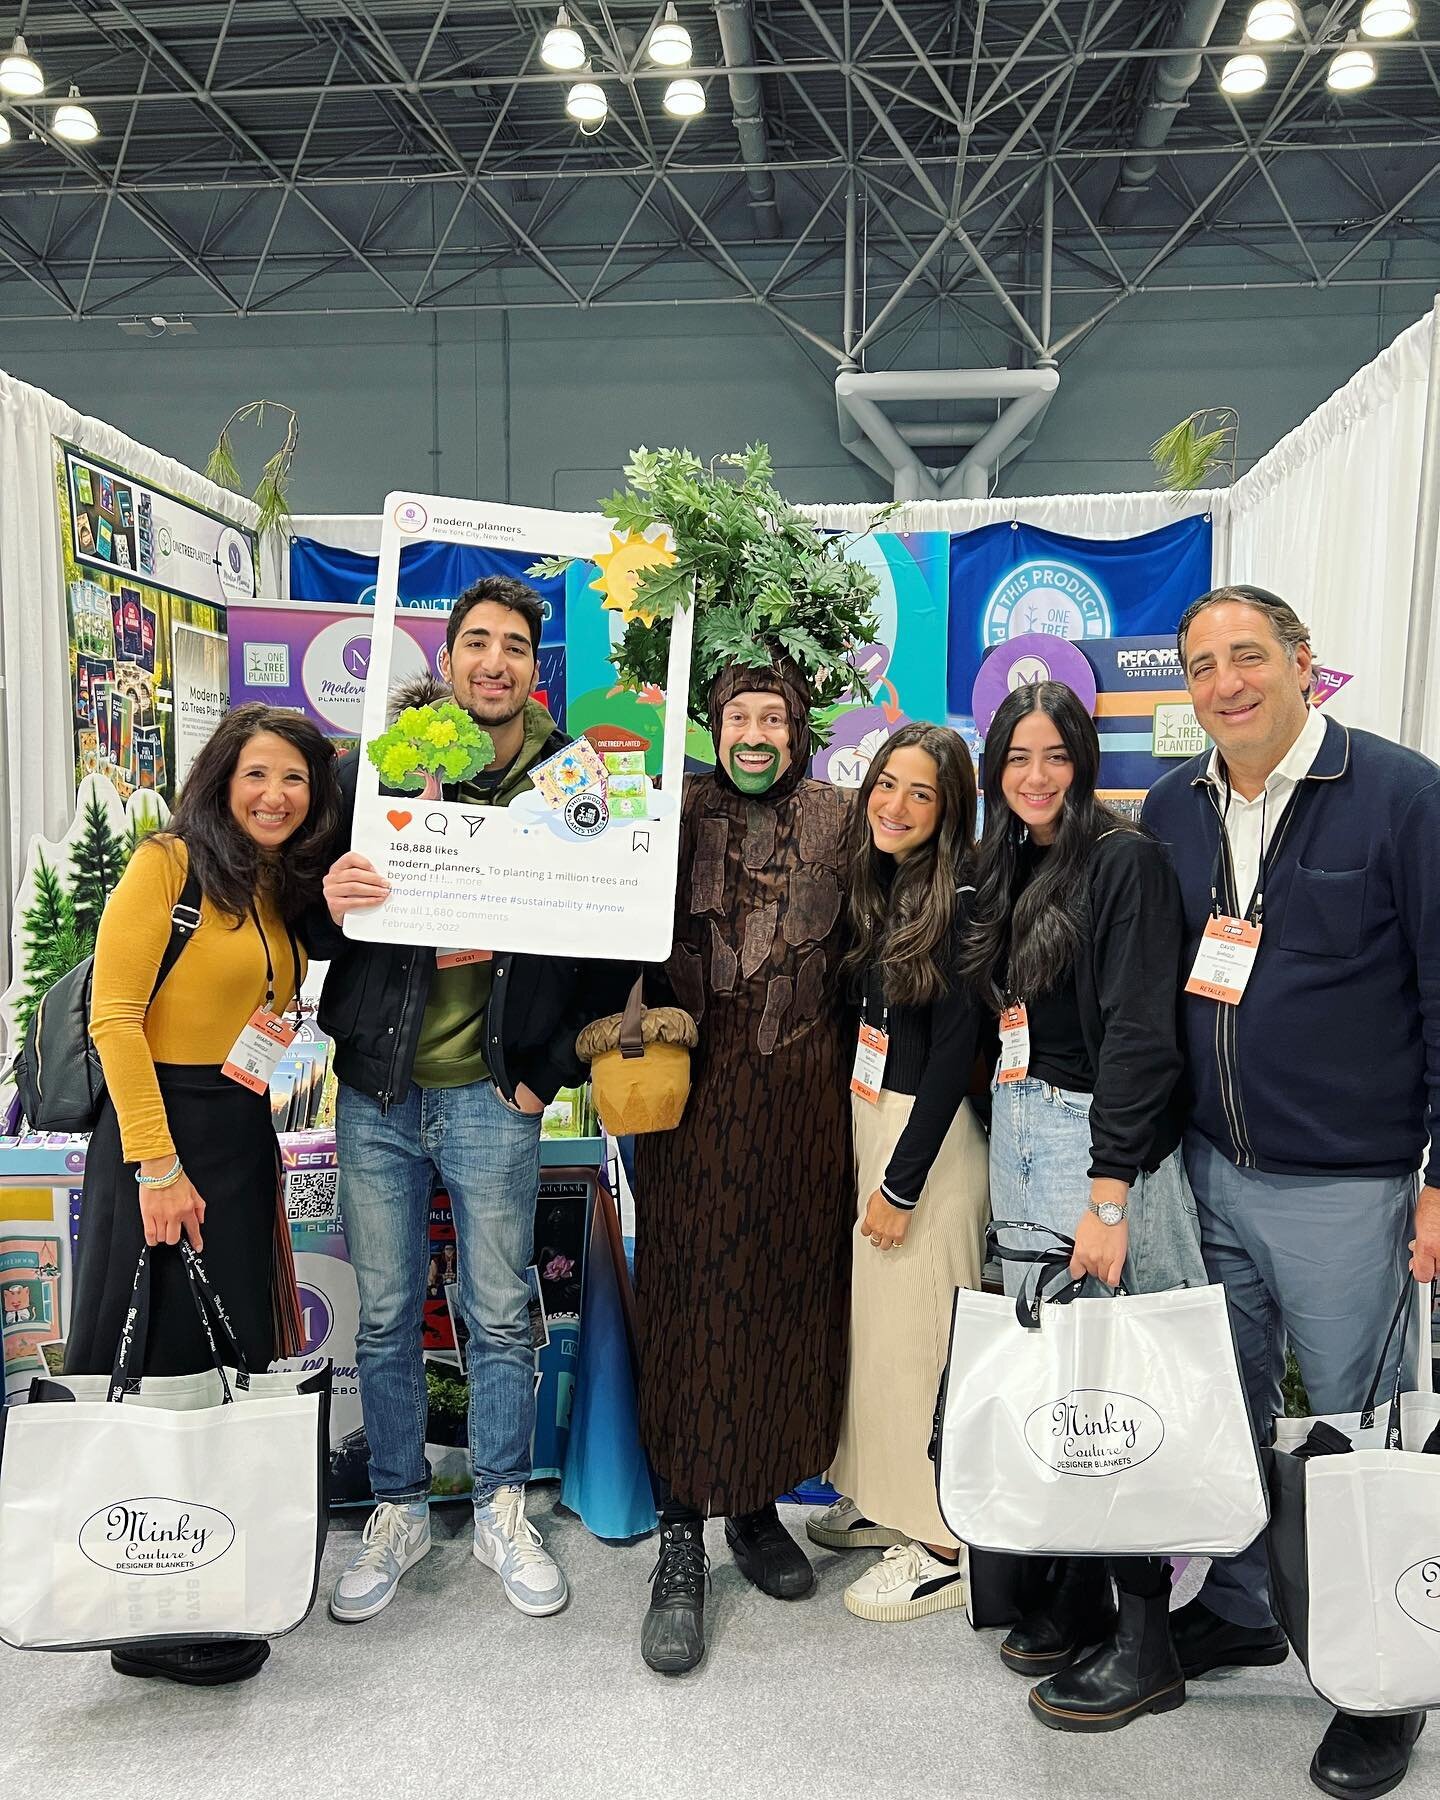 Great time spreading the word about @modern_planners_ today at #NYNOW at the Javits Center! @modern_planners_ plants a tree with @onetreeplanted for every planner/notebook sold 🌳
Come say hi at booth 2097 tomorrow! 📓🍃

#thenyctree #modernplanners 